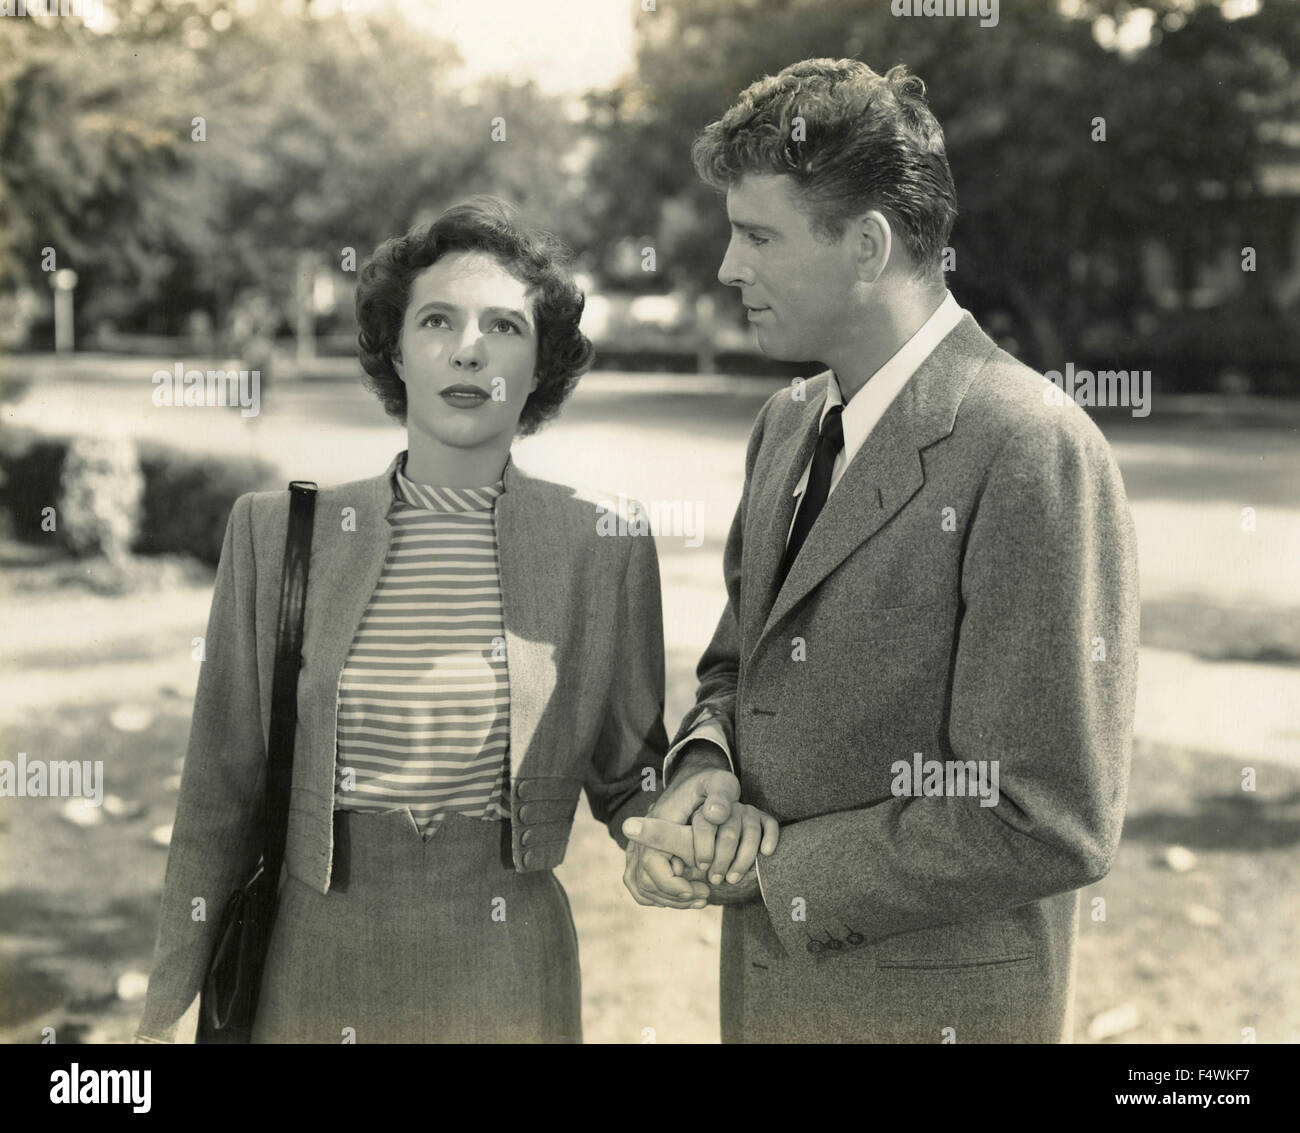 American actors Burt Lancaster and Louise Horton in a scene from the movie 'All My Sons' Stock Photo